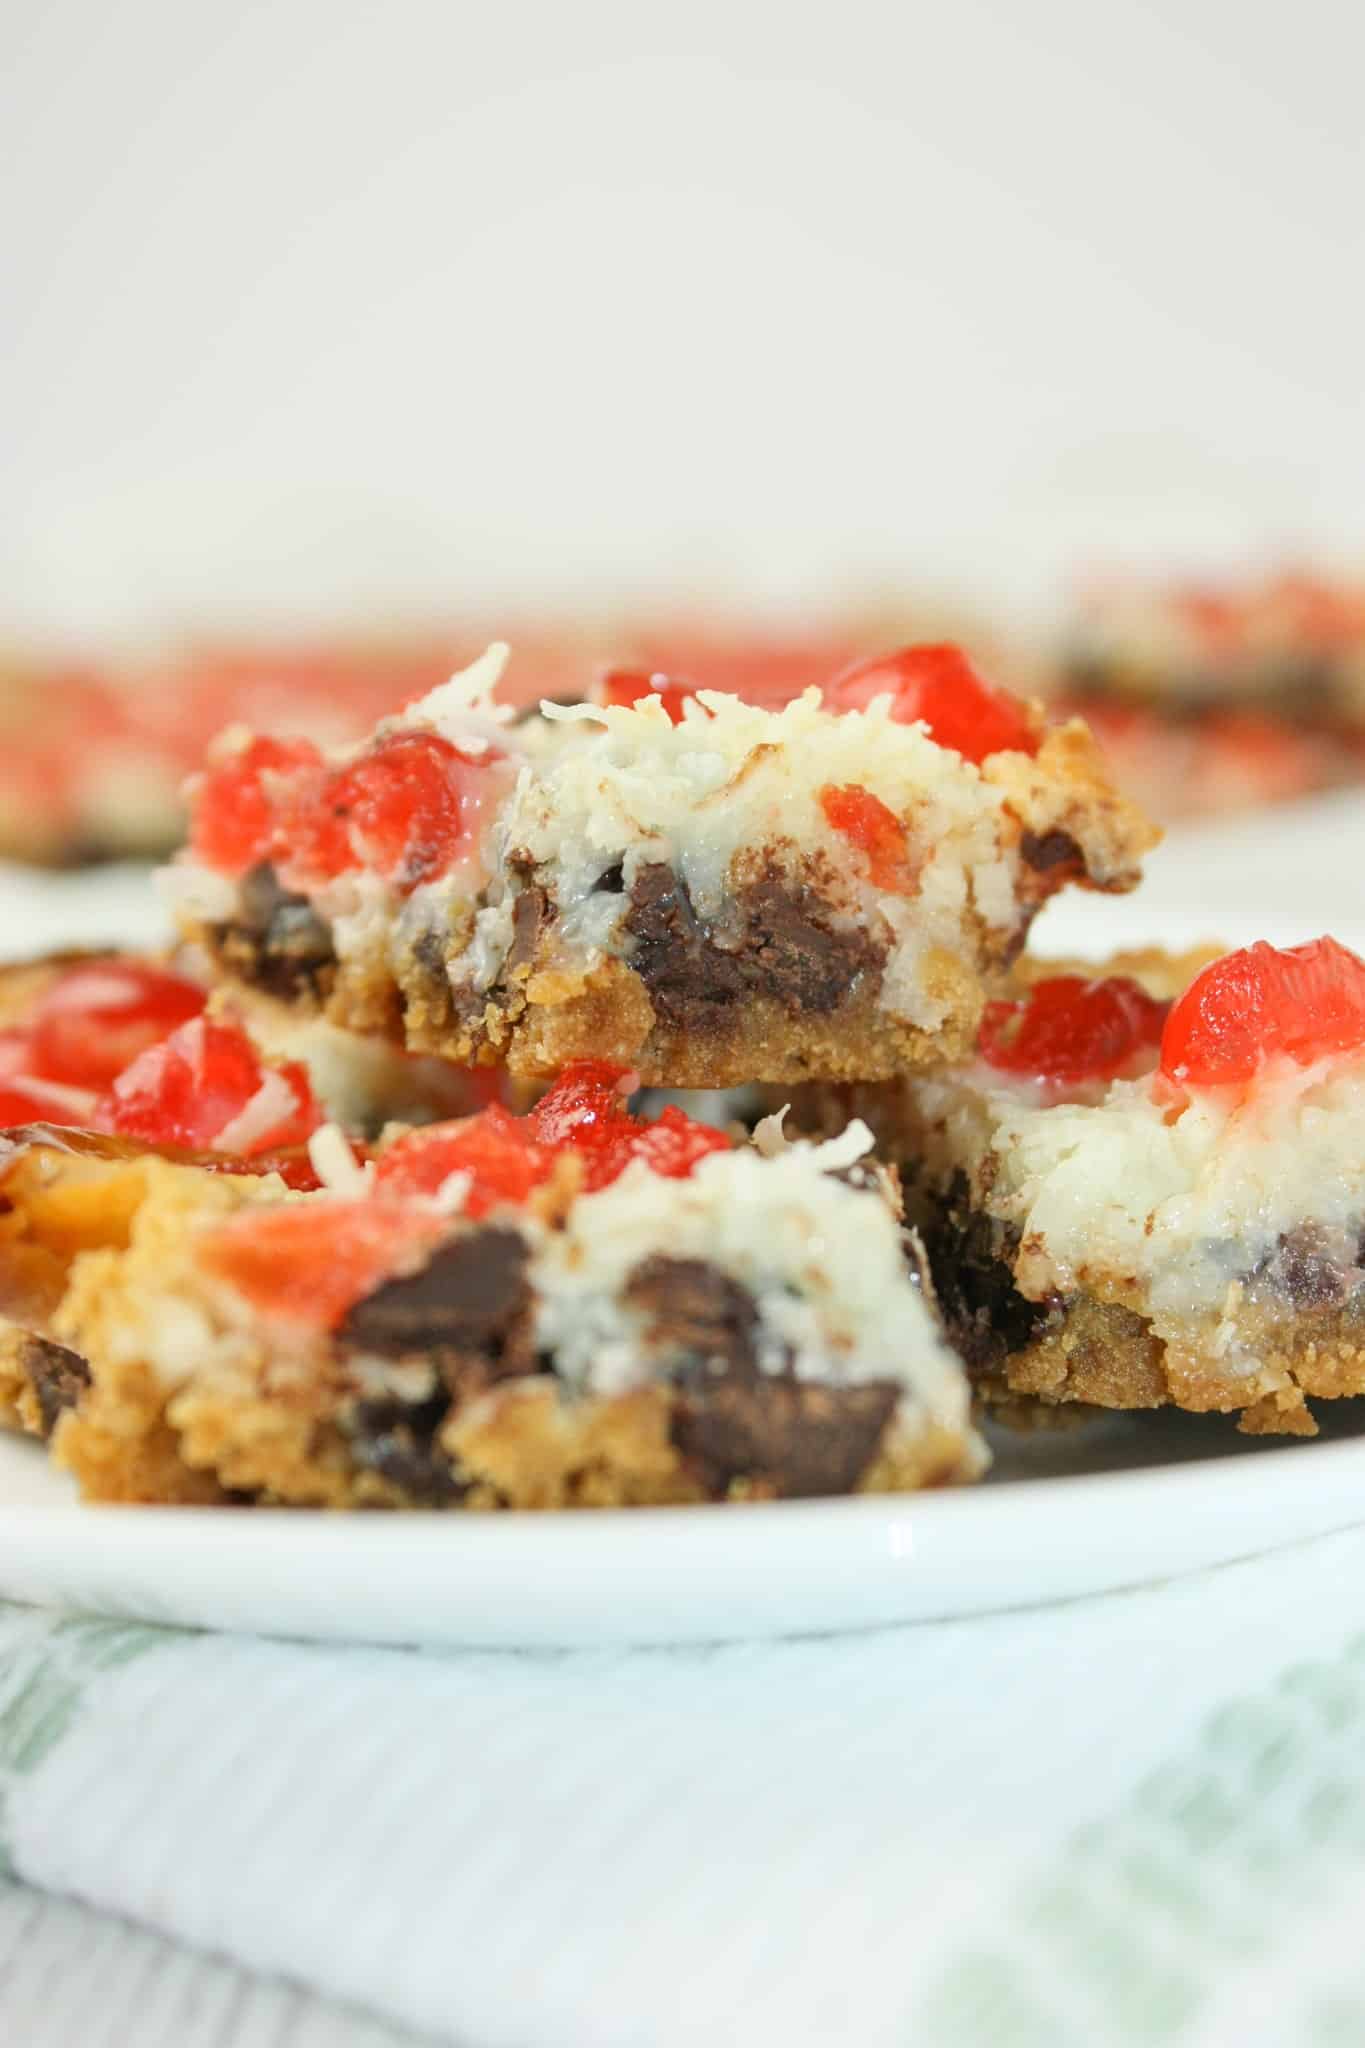 It is easy to make this traditional holiday treat gluten free by switching out the graham crumbs.  Magic Cookie Bars were always on our Christmas dessert trays growing up so this year I decided to add them to mine!